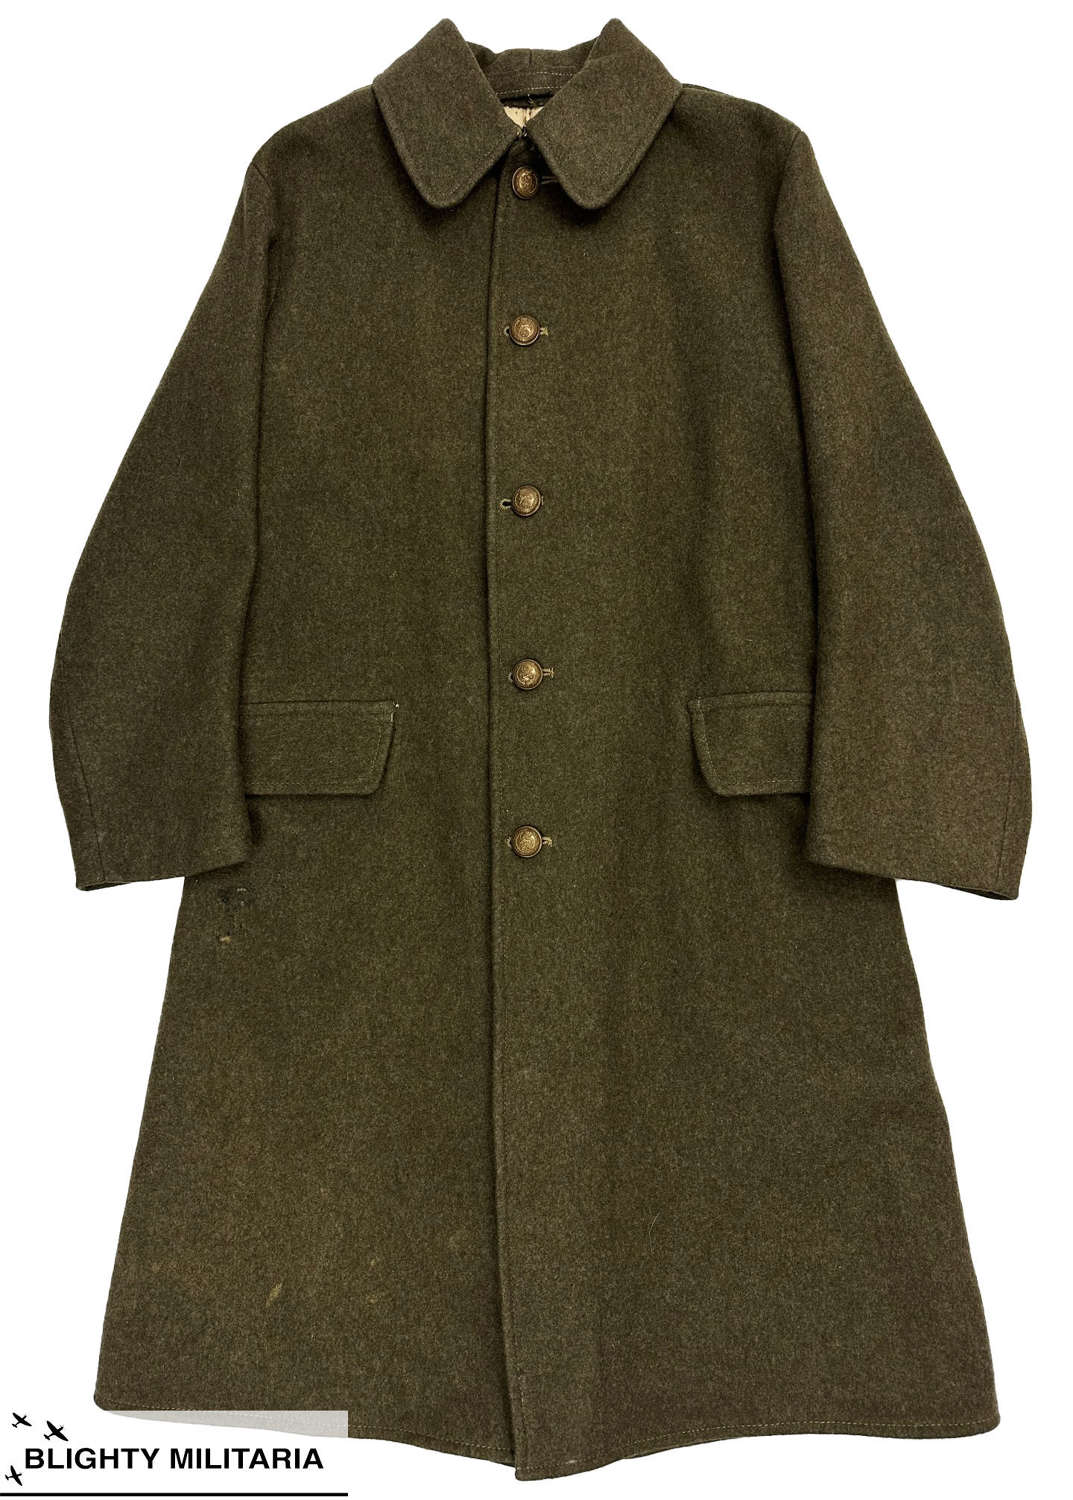 Scarce Original 1930s British Army Single Breasted Greatcoat